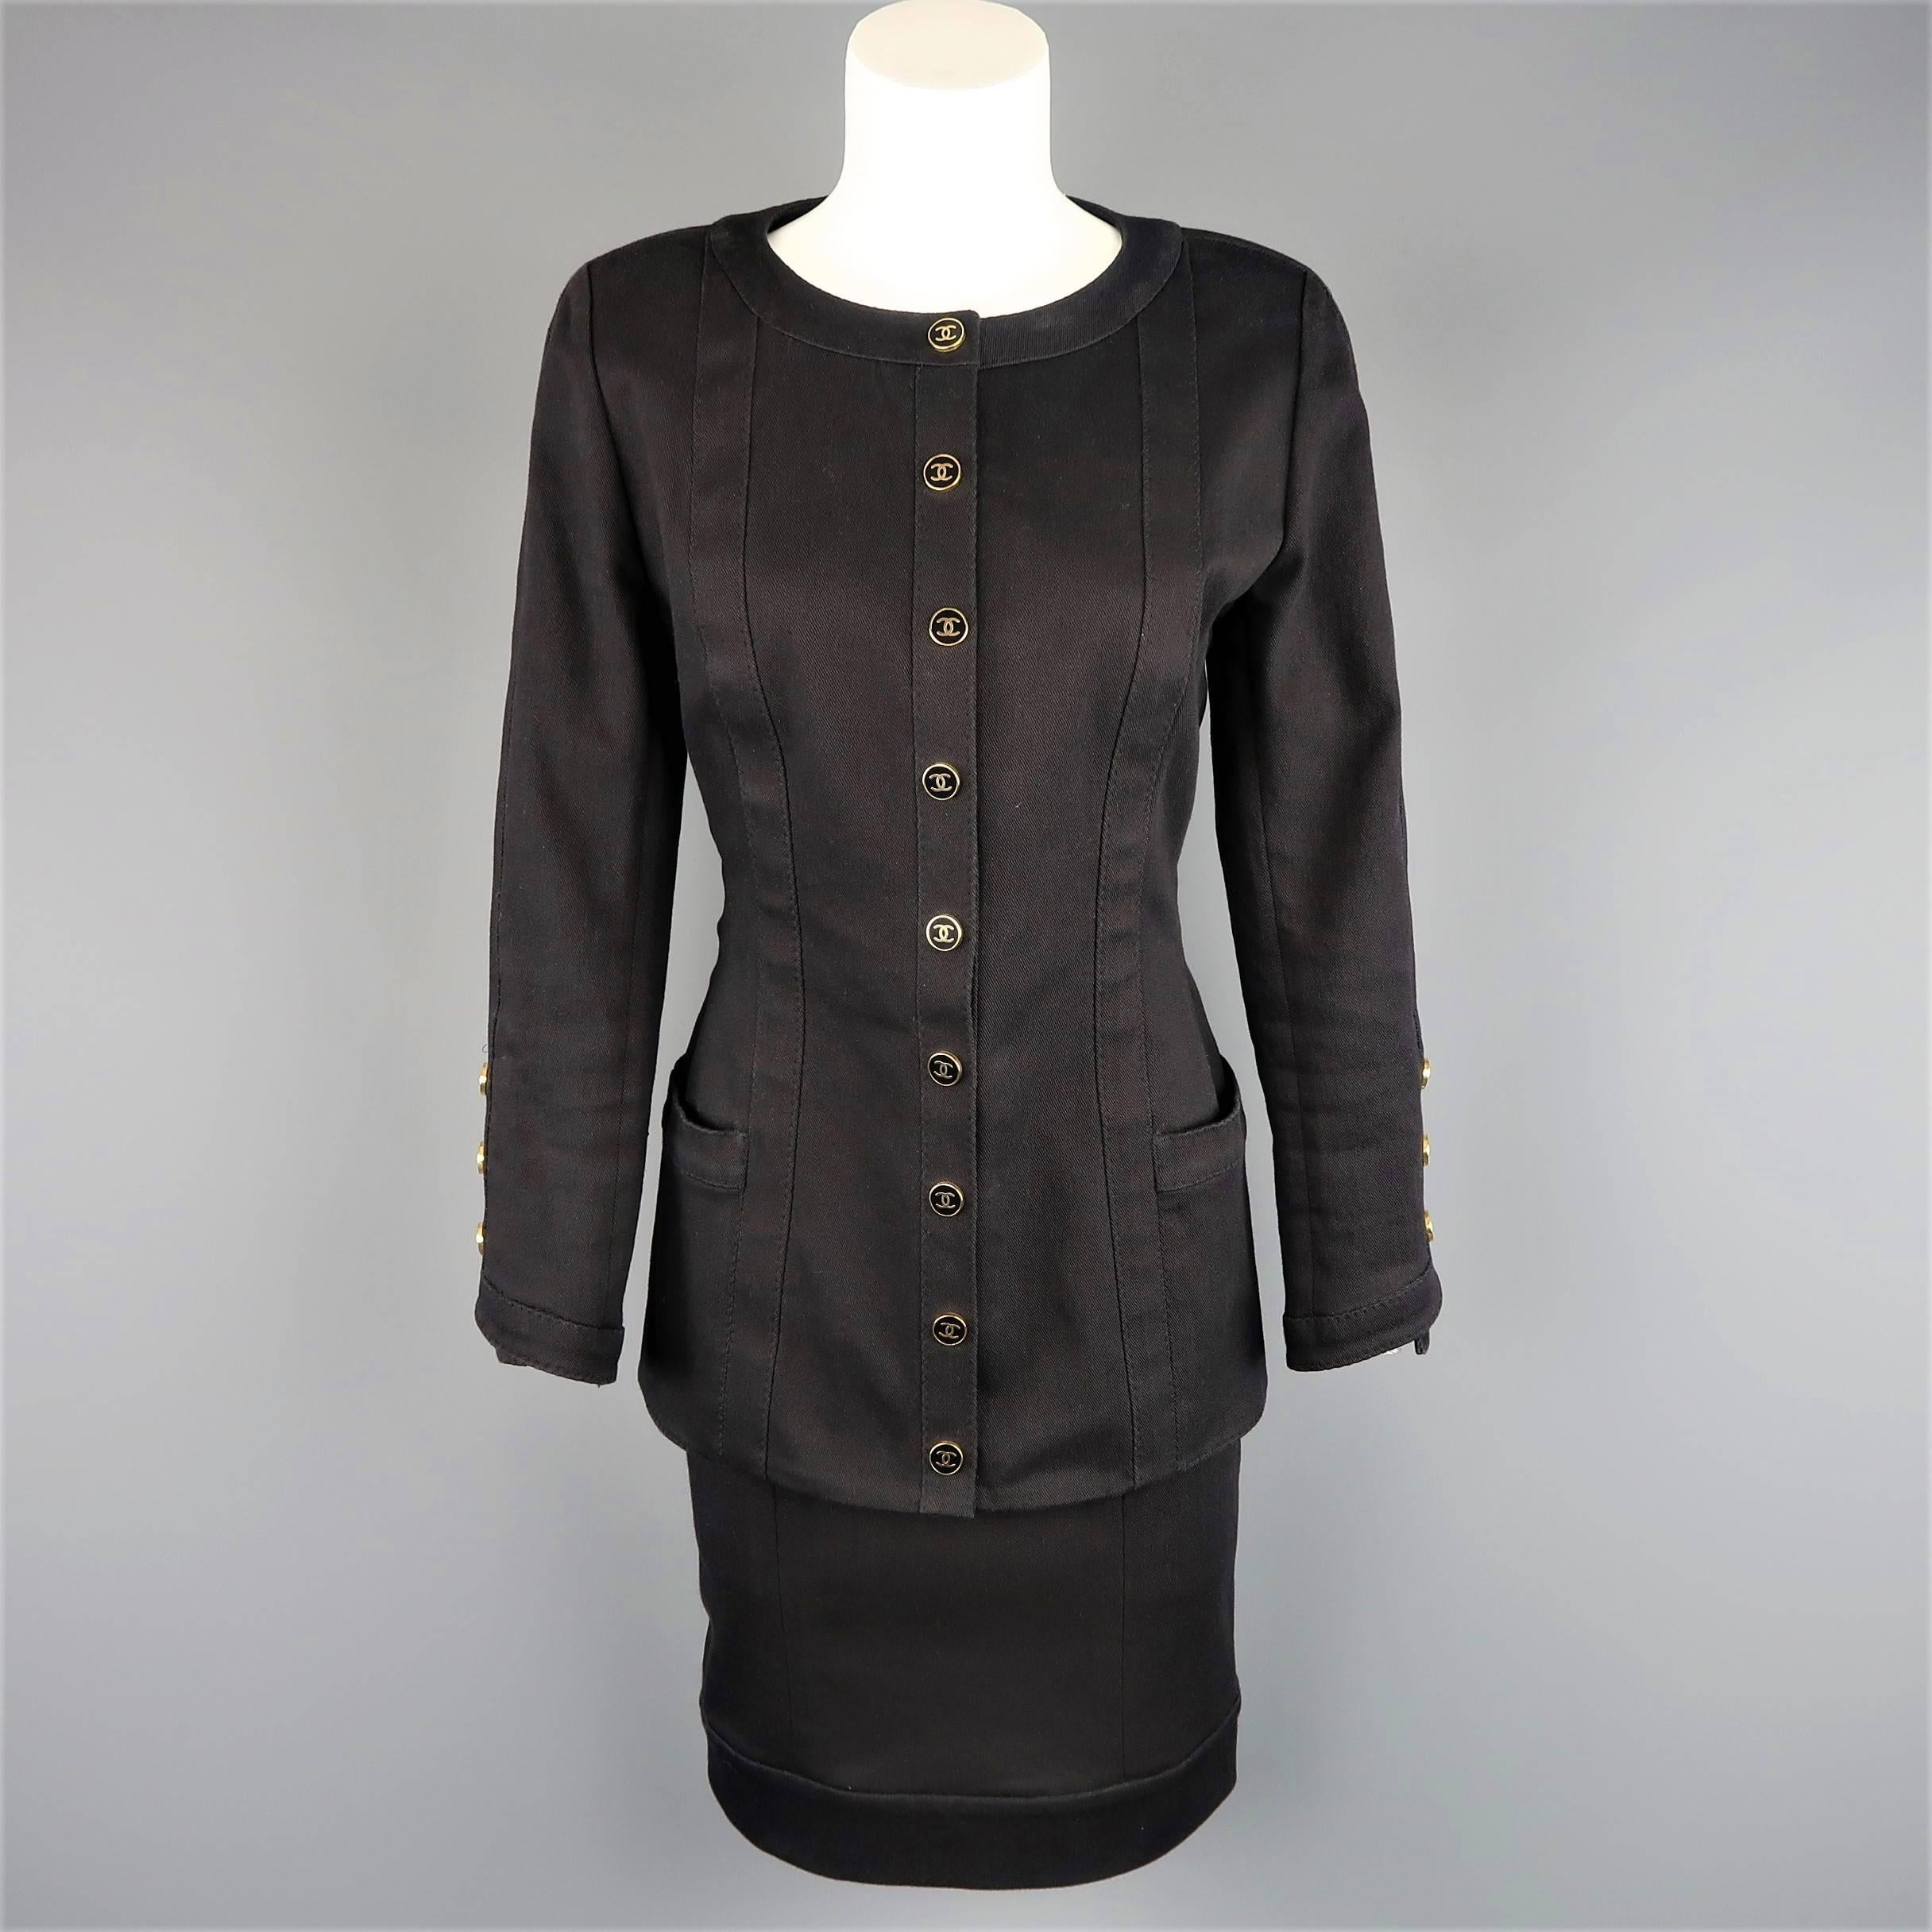 Vintage CHANEL suit comes in black cotton denim and includes a round neck, collarless jacket with padded shoulder, side pockets, and gold tone black enamel CC logo snap closures and matching pencil skirt. Minor wear. Made in France.
 
Good Pre-Owned